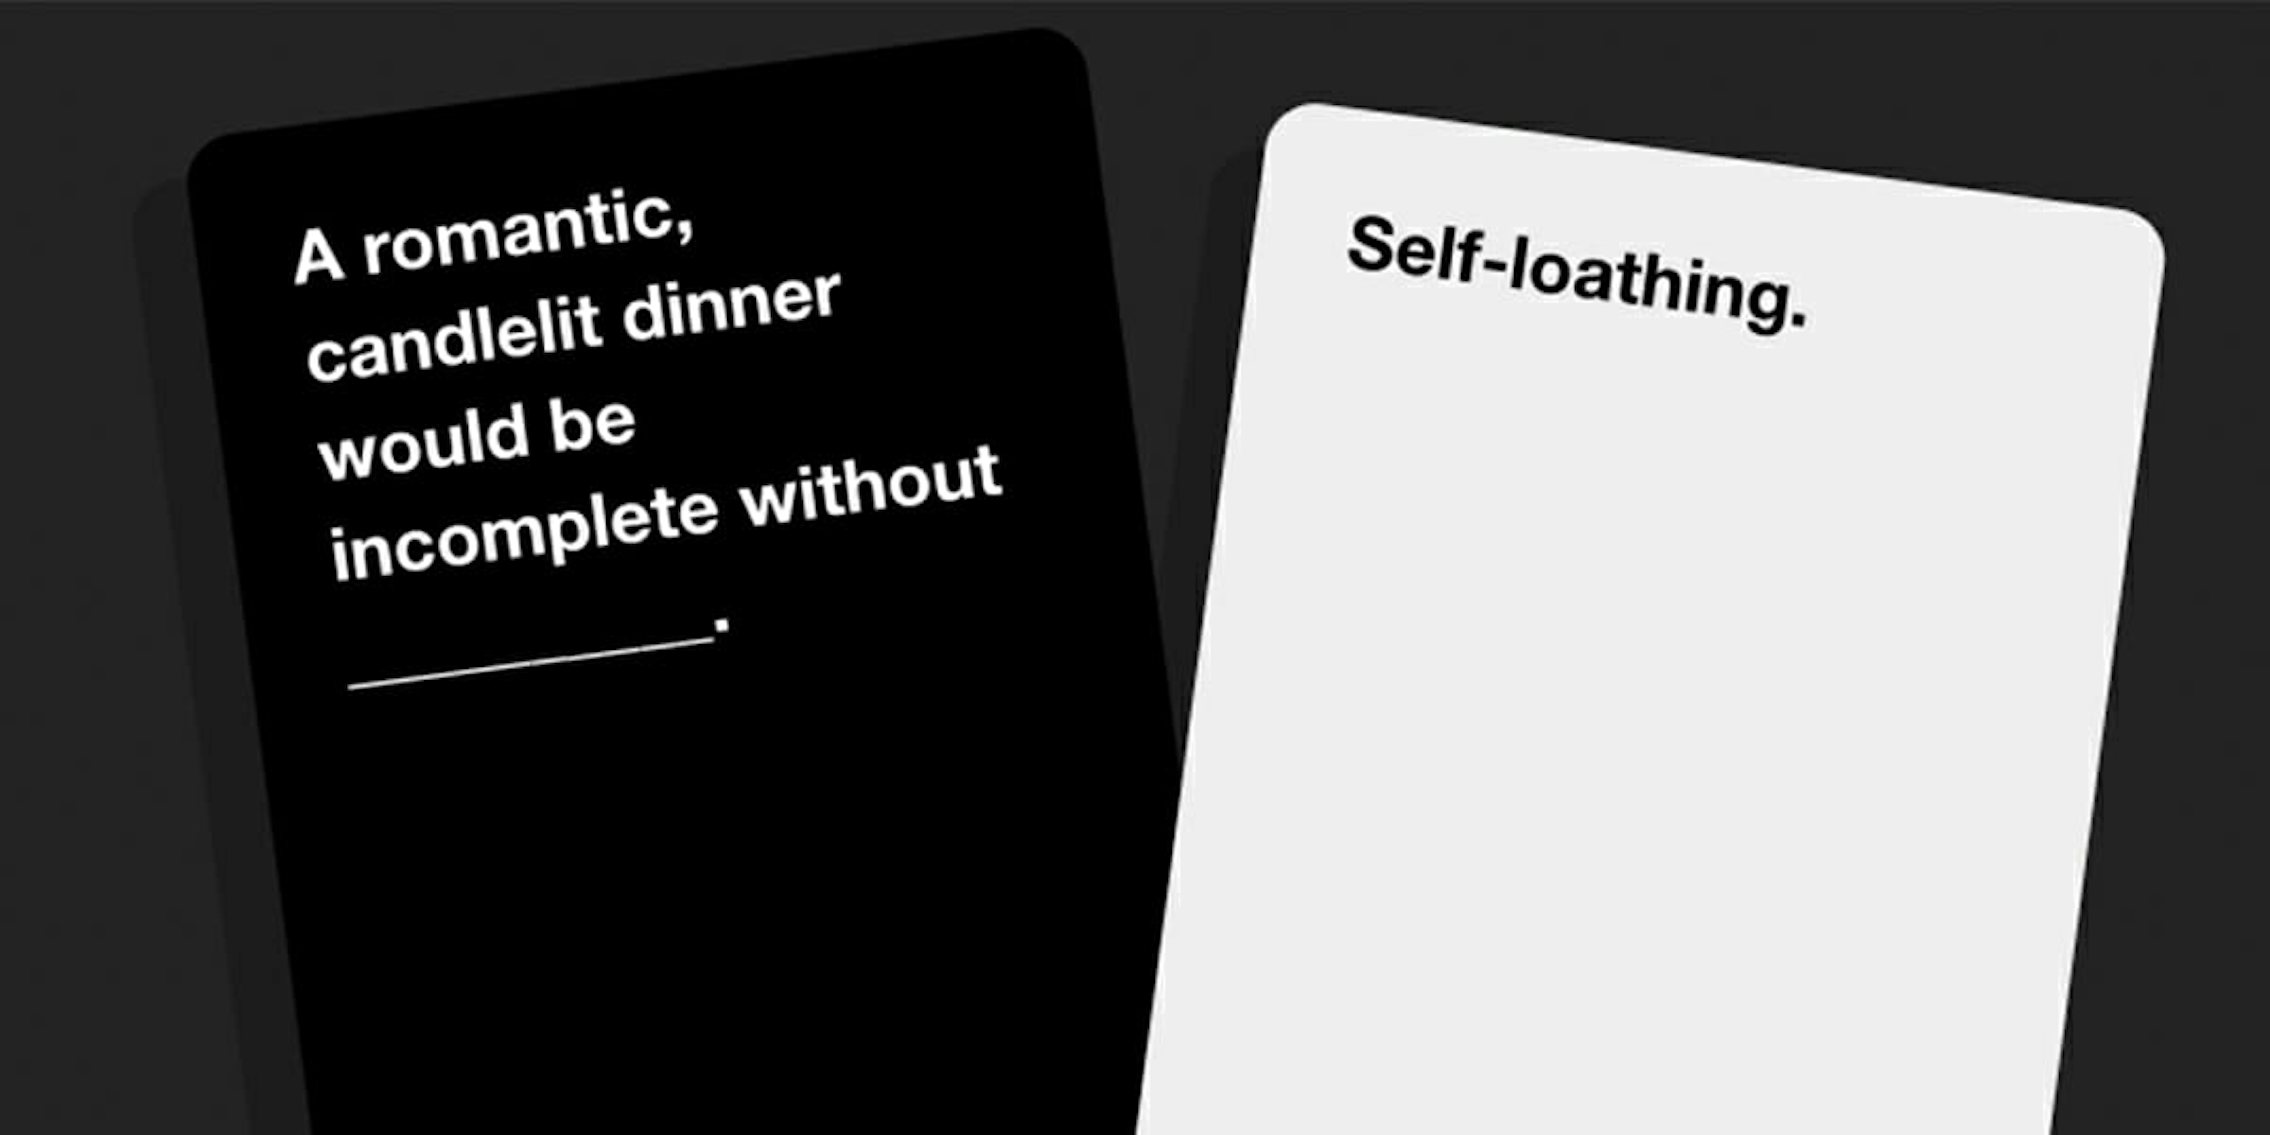 CapCut_cards against humanity add on packs